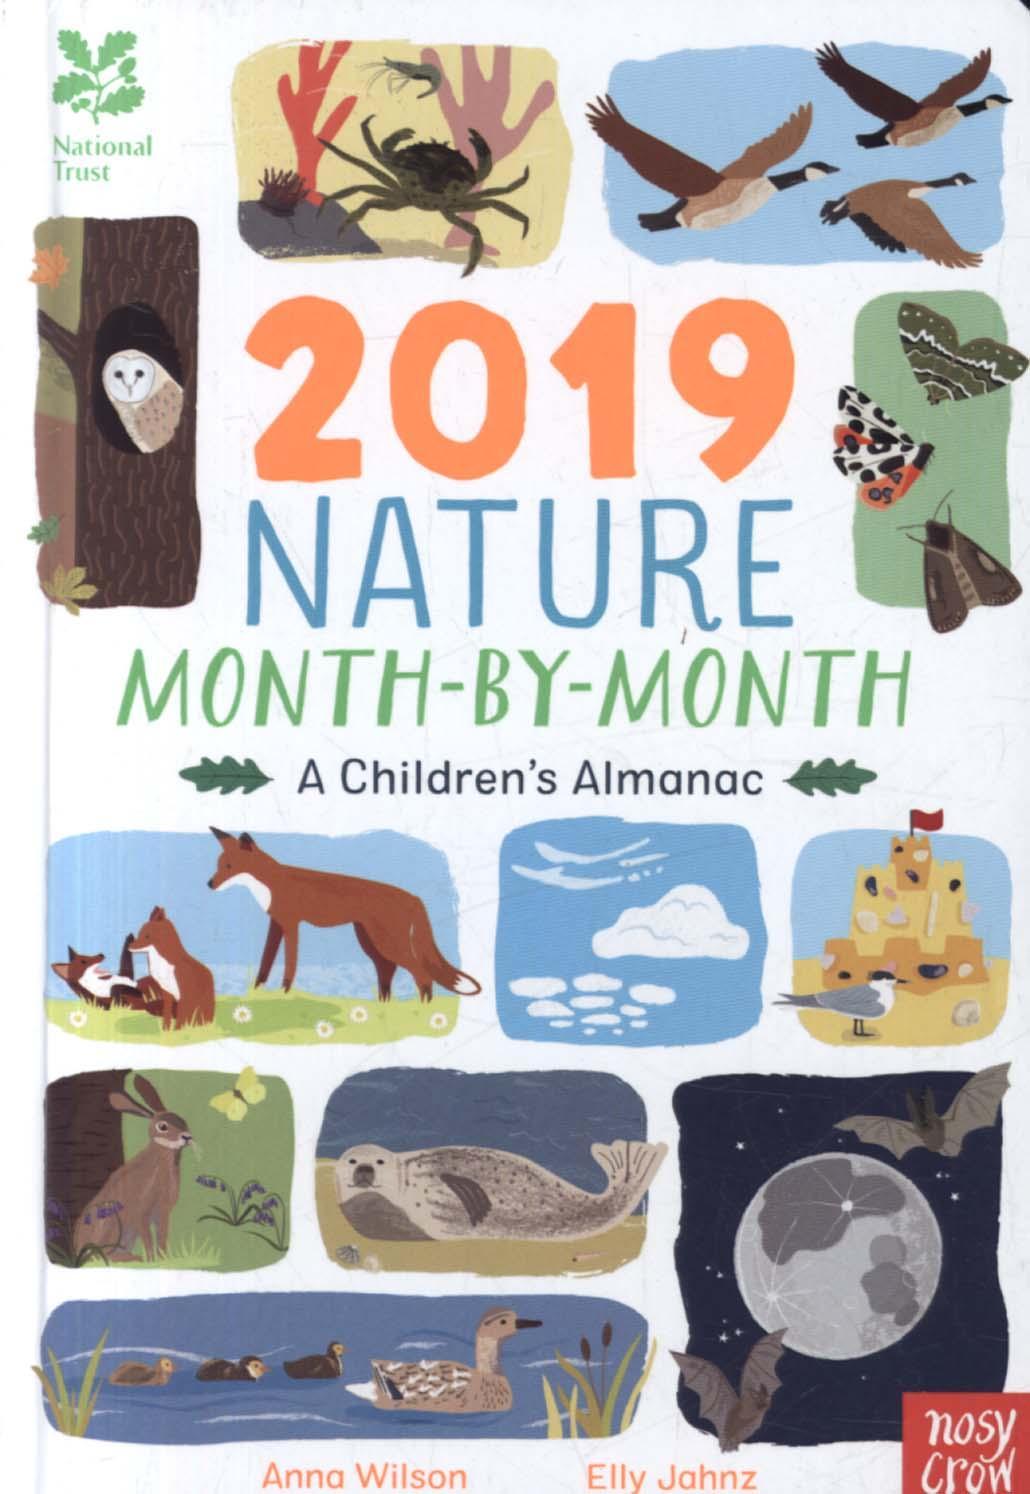 National Trust: 2019 Nature Month-By-Month: A Children's Alm